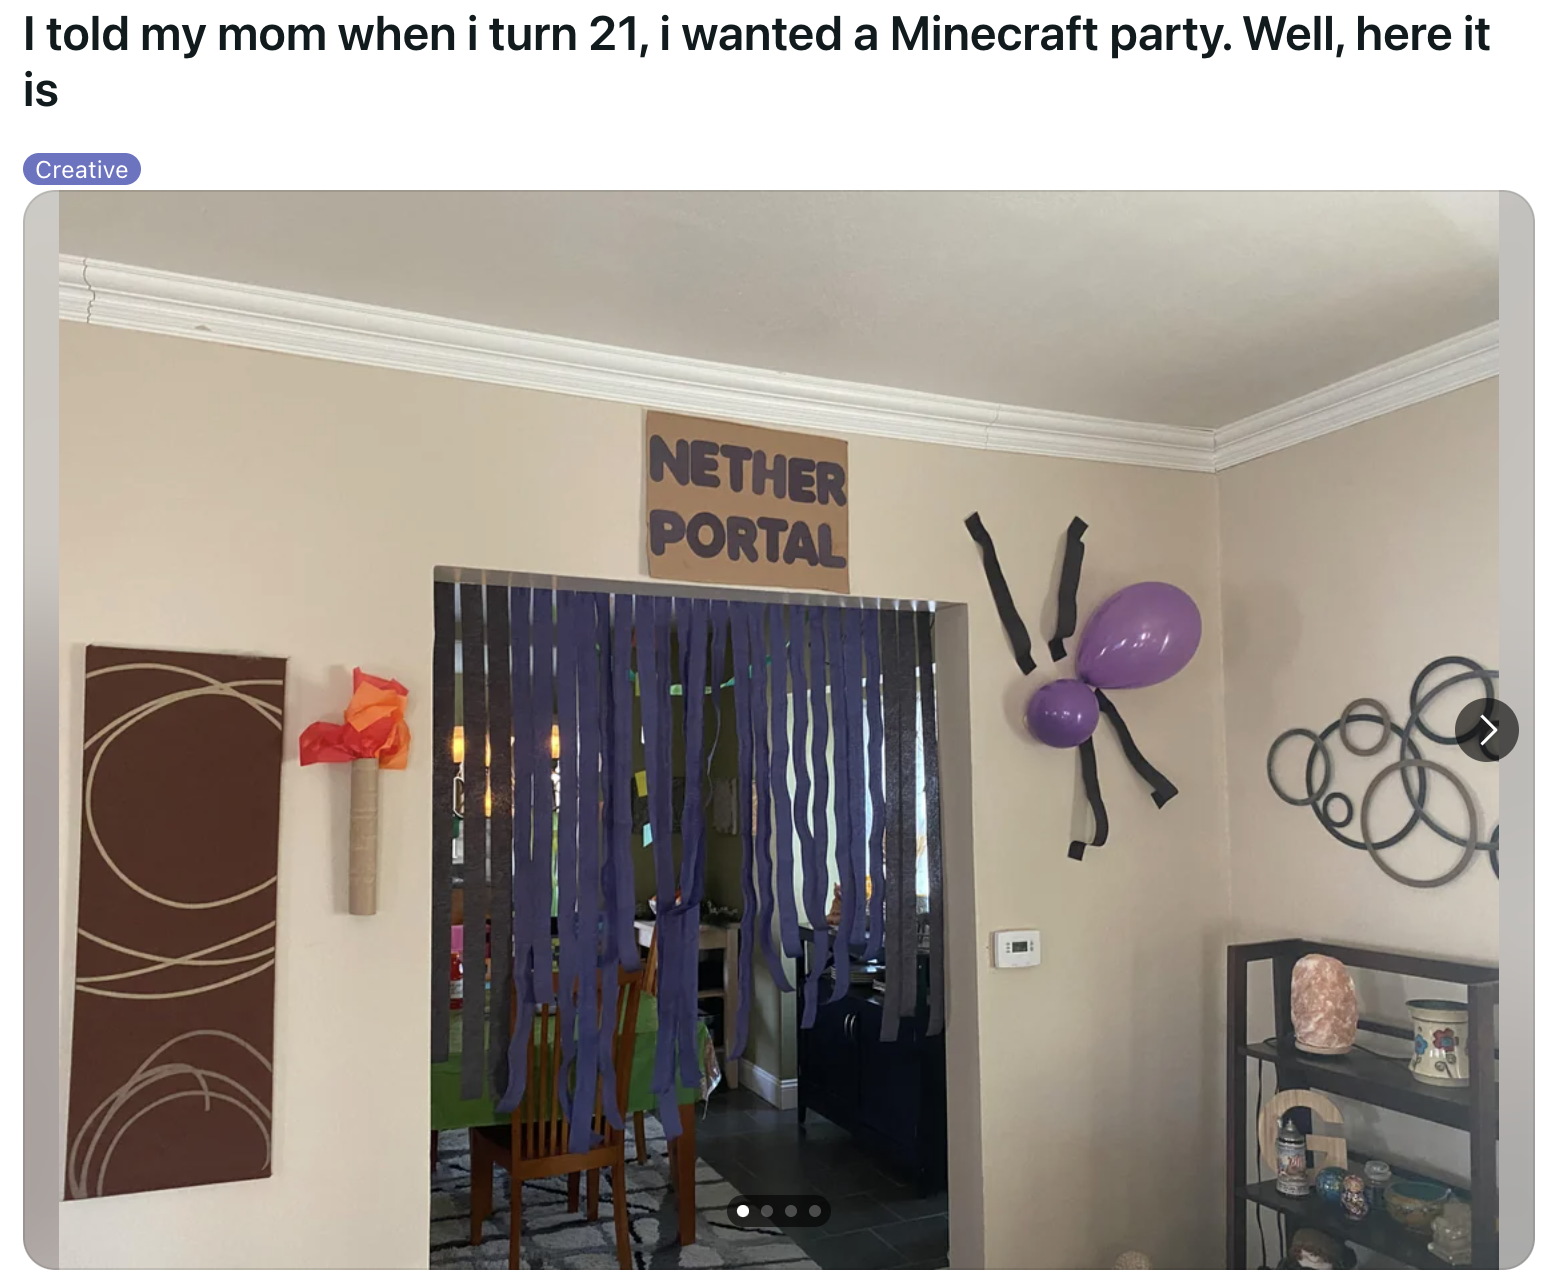 A room decorated with a Minecraft theme, including a Nether Portal banner and wall resembling a portal, for a 21st birthday celebration